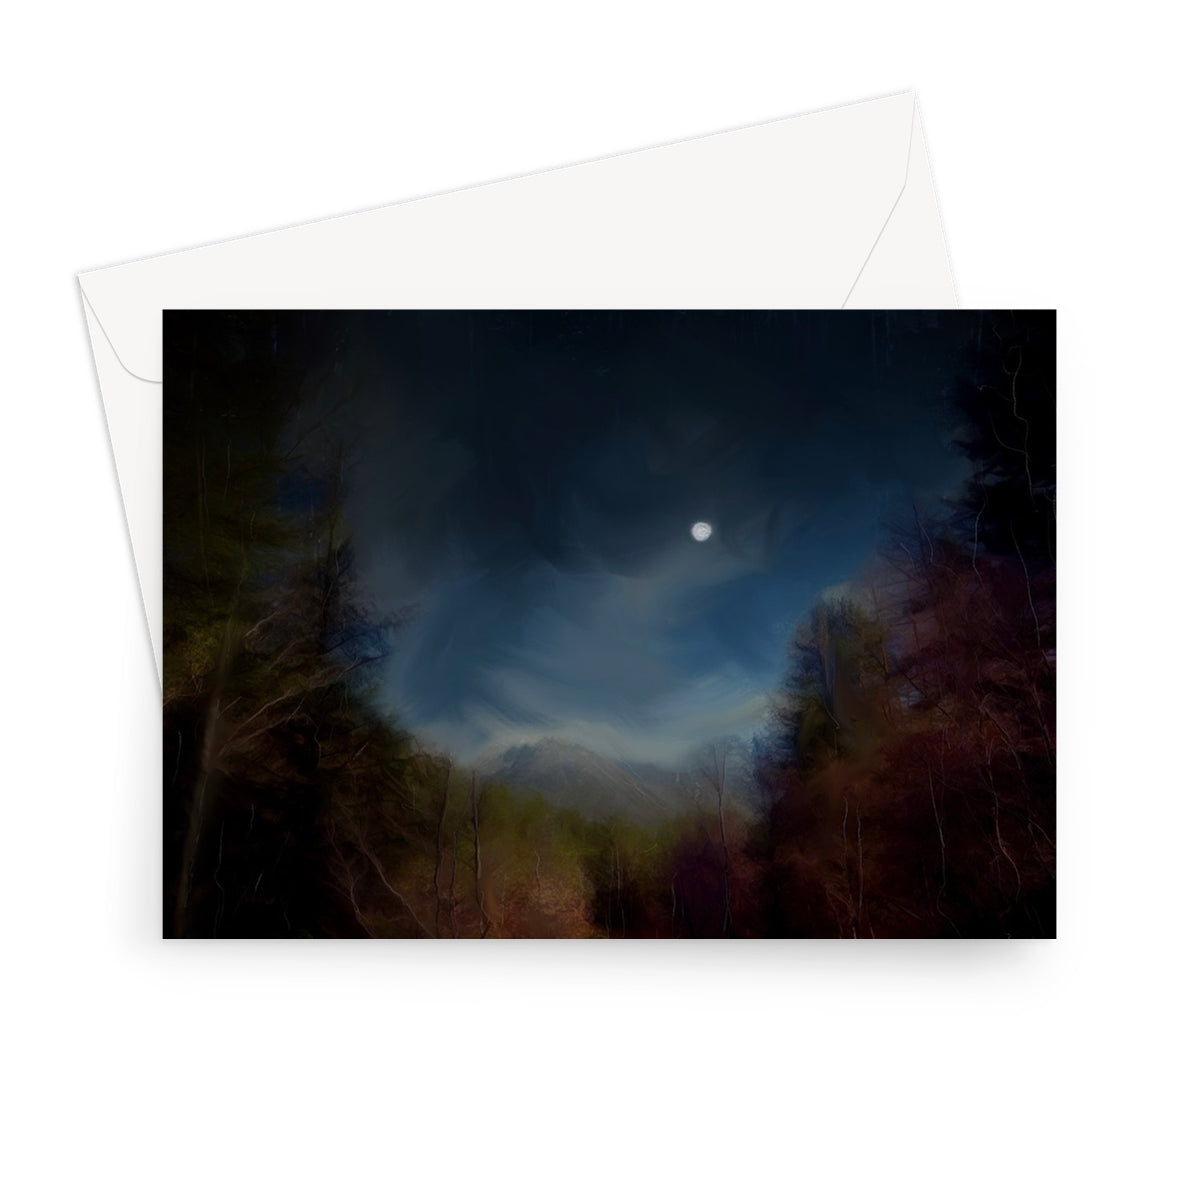 Glencoe Lochan Moonlight Art Gifts Greeting Card-Greetings Cards-Scottish Lochs & Mountains Art Gallery-7"x5"-10 Cards-Paintings, Prints, Homeware, Art Gifts From Scotland By Scottish Artist Kevin Hunter